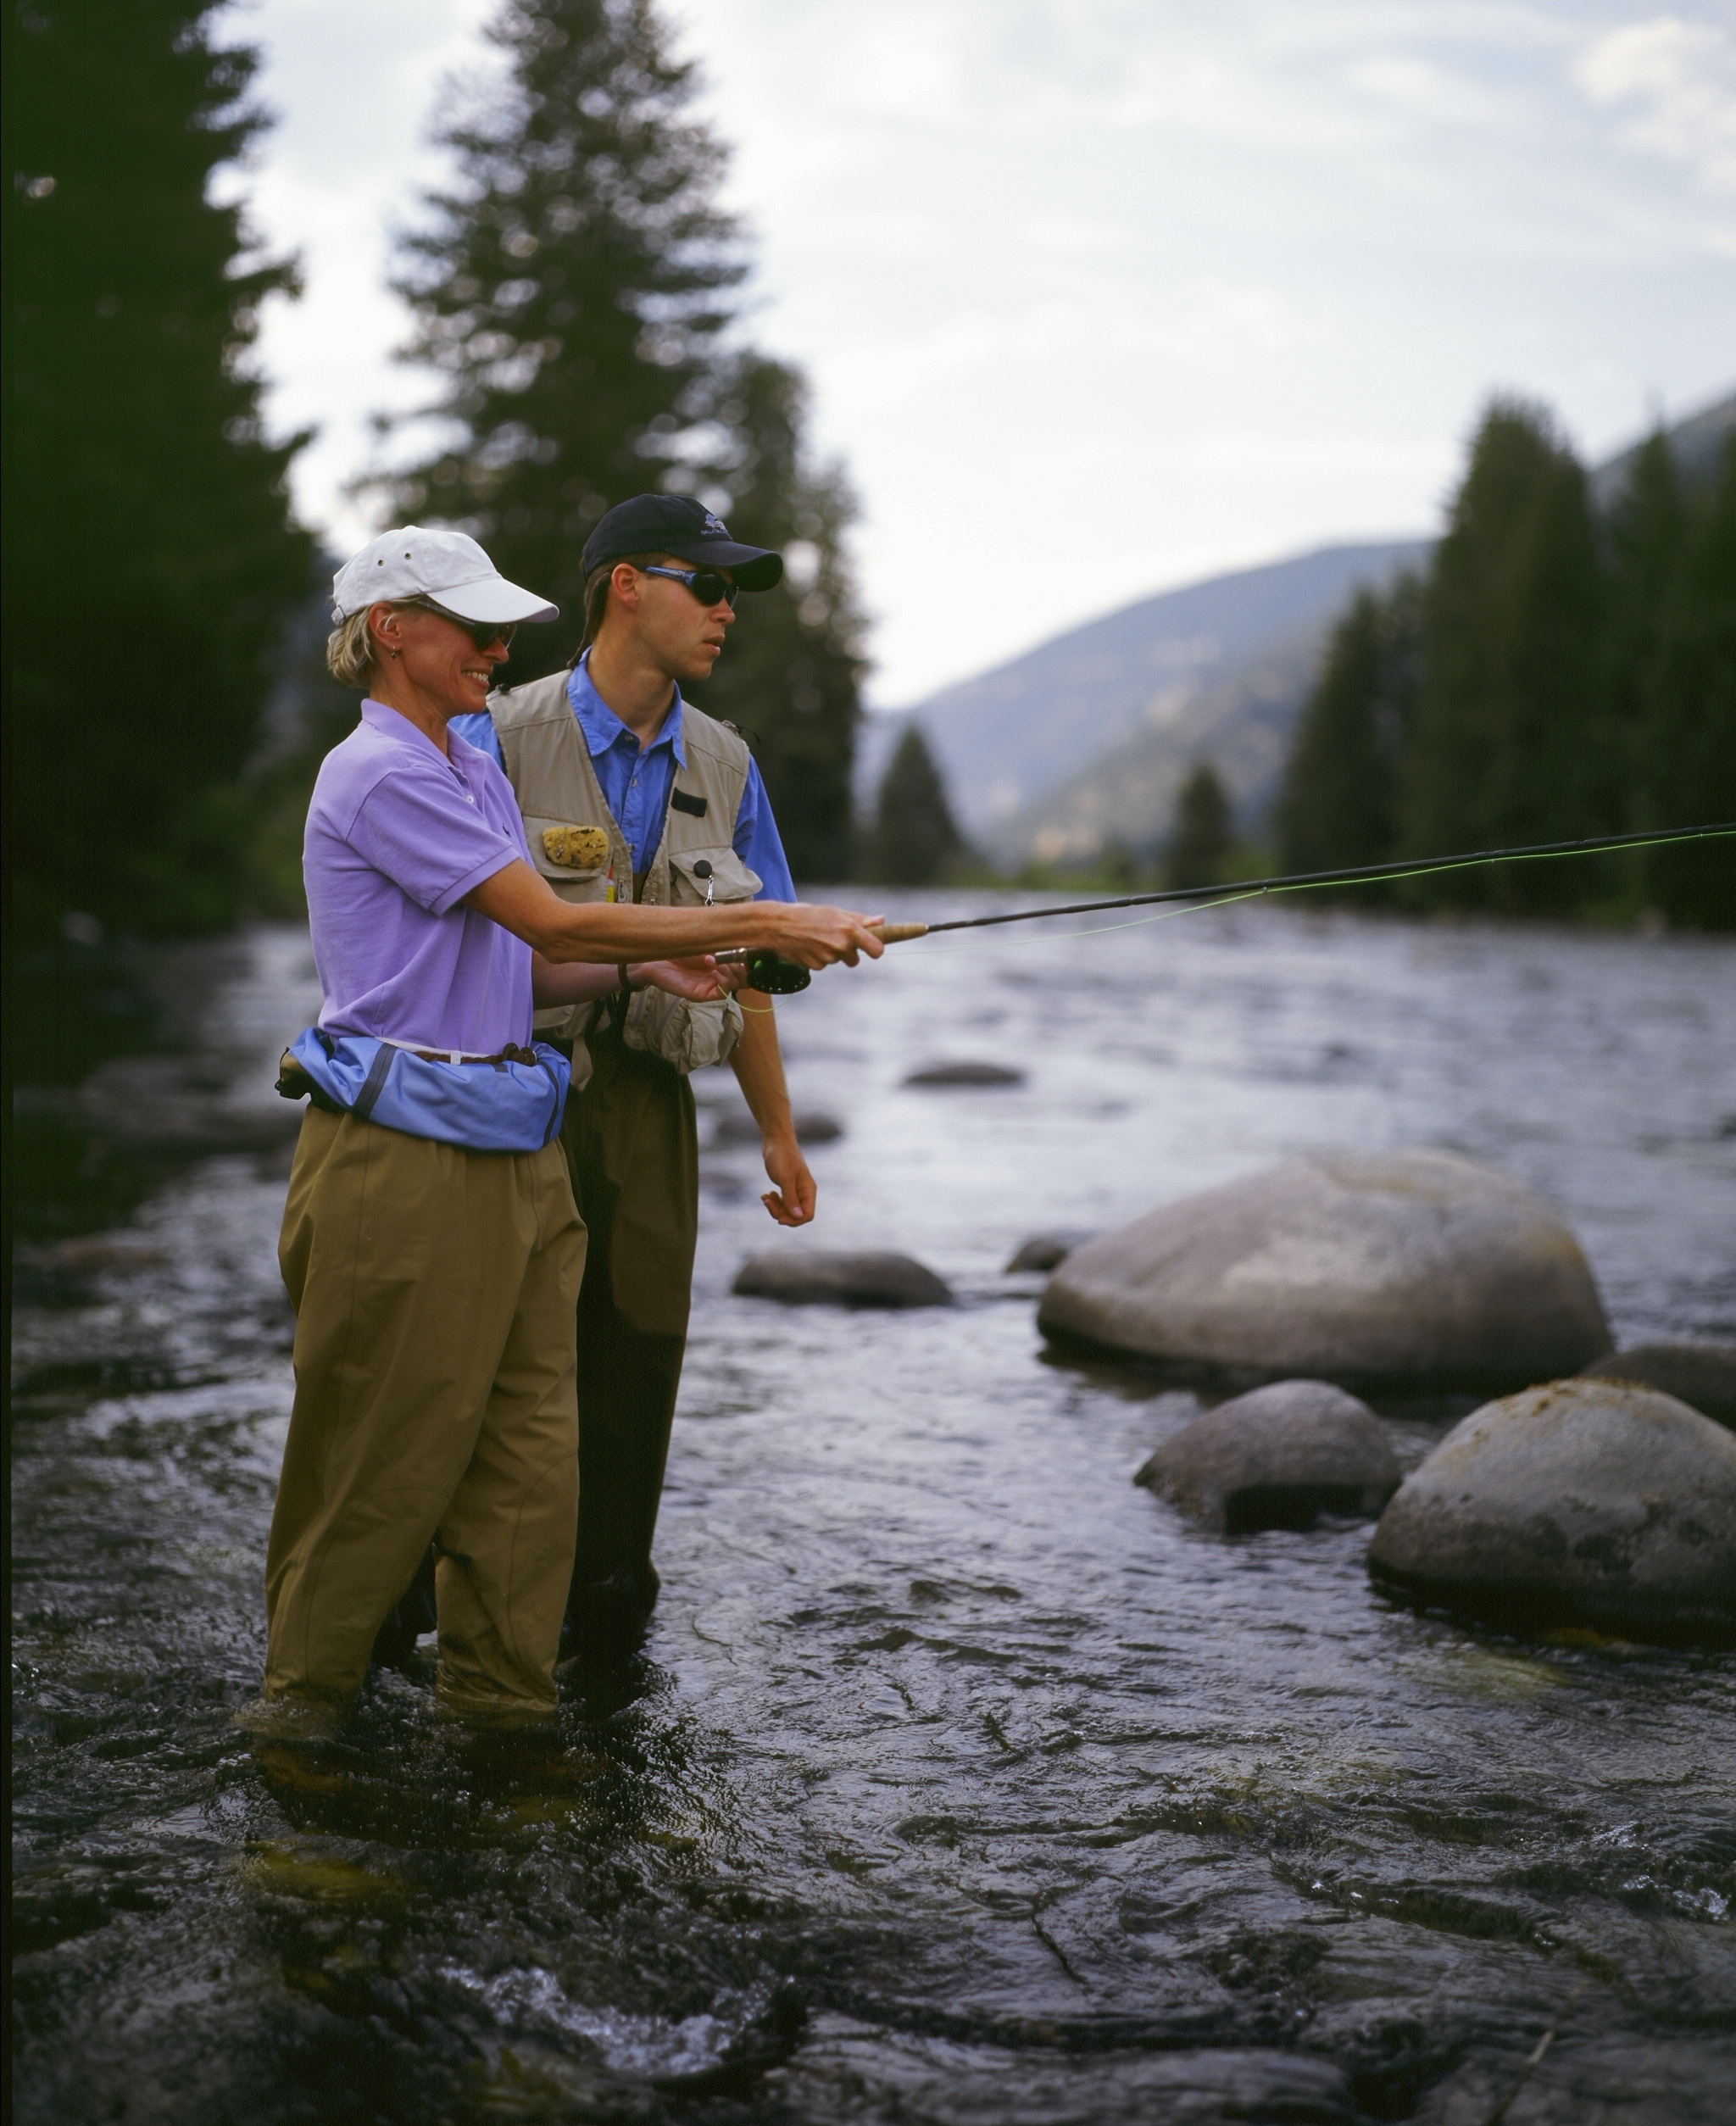 Fly fishing on the Gallatin River, a Blue Ribbon trout stream that runs through the 320 Guest Ranch